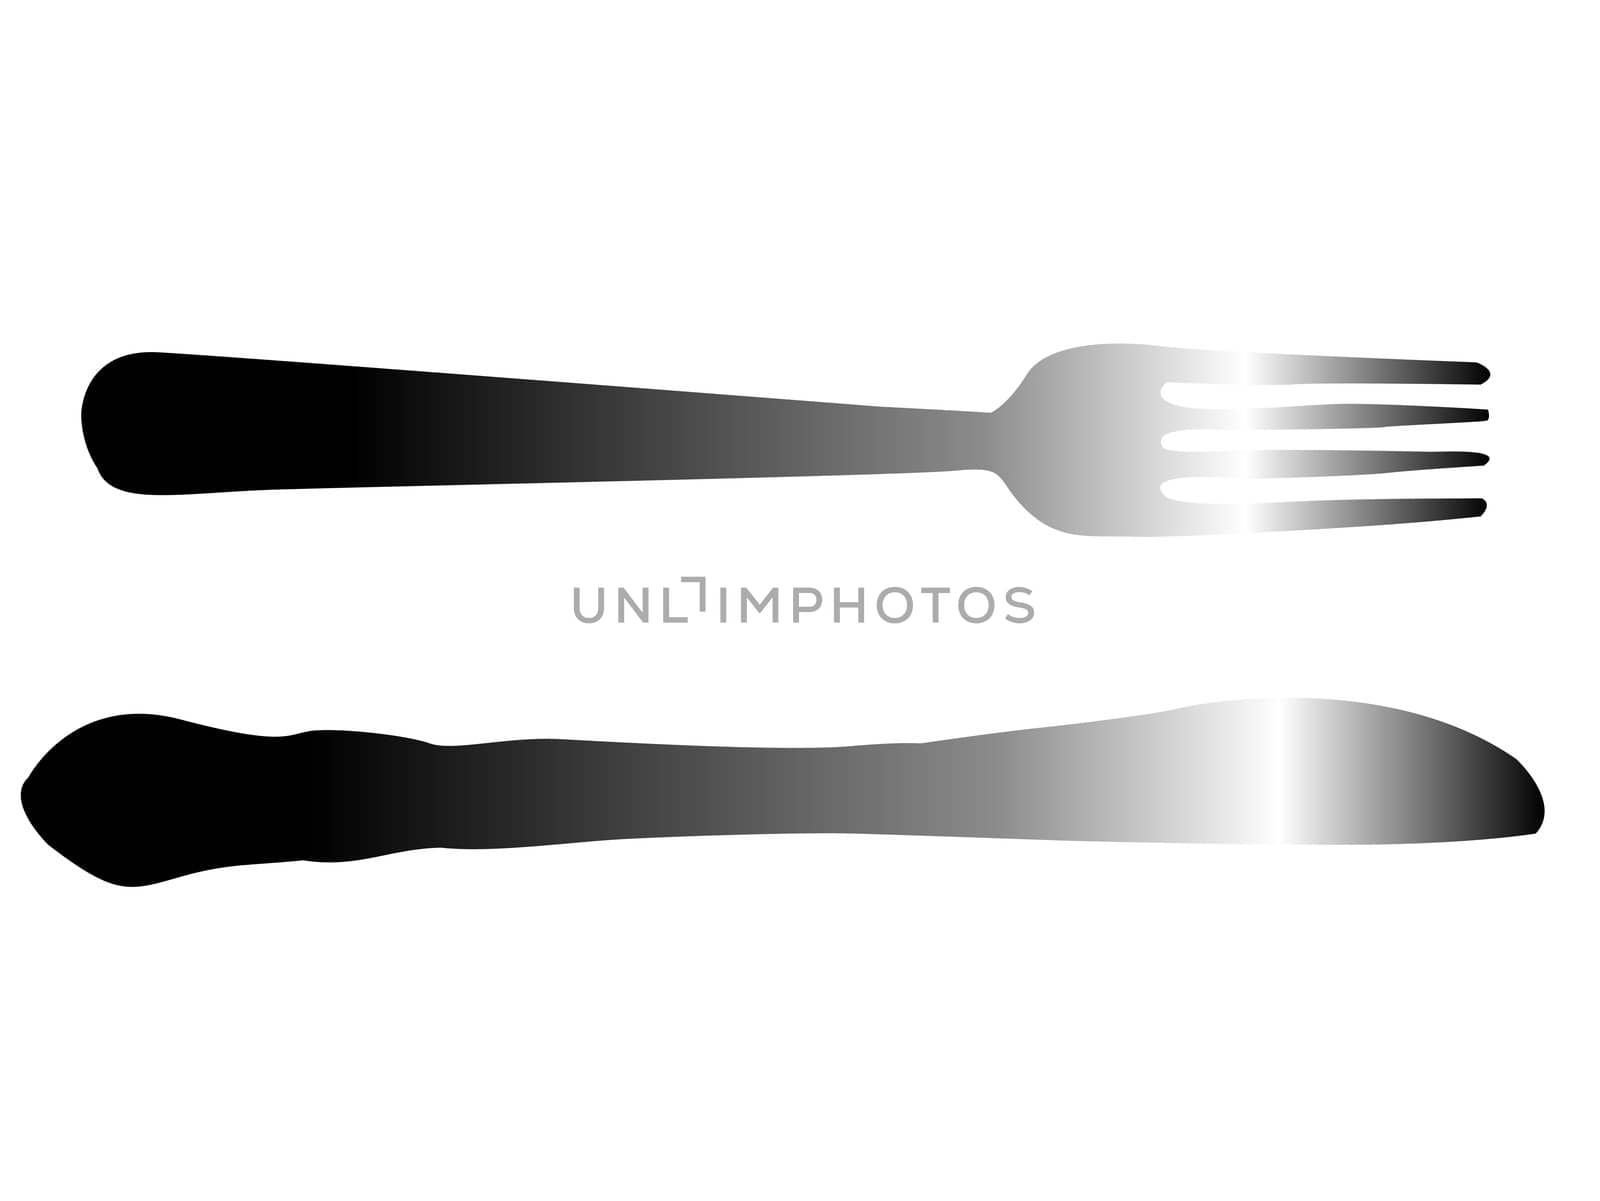 cutlery set by imagerymajestic